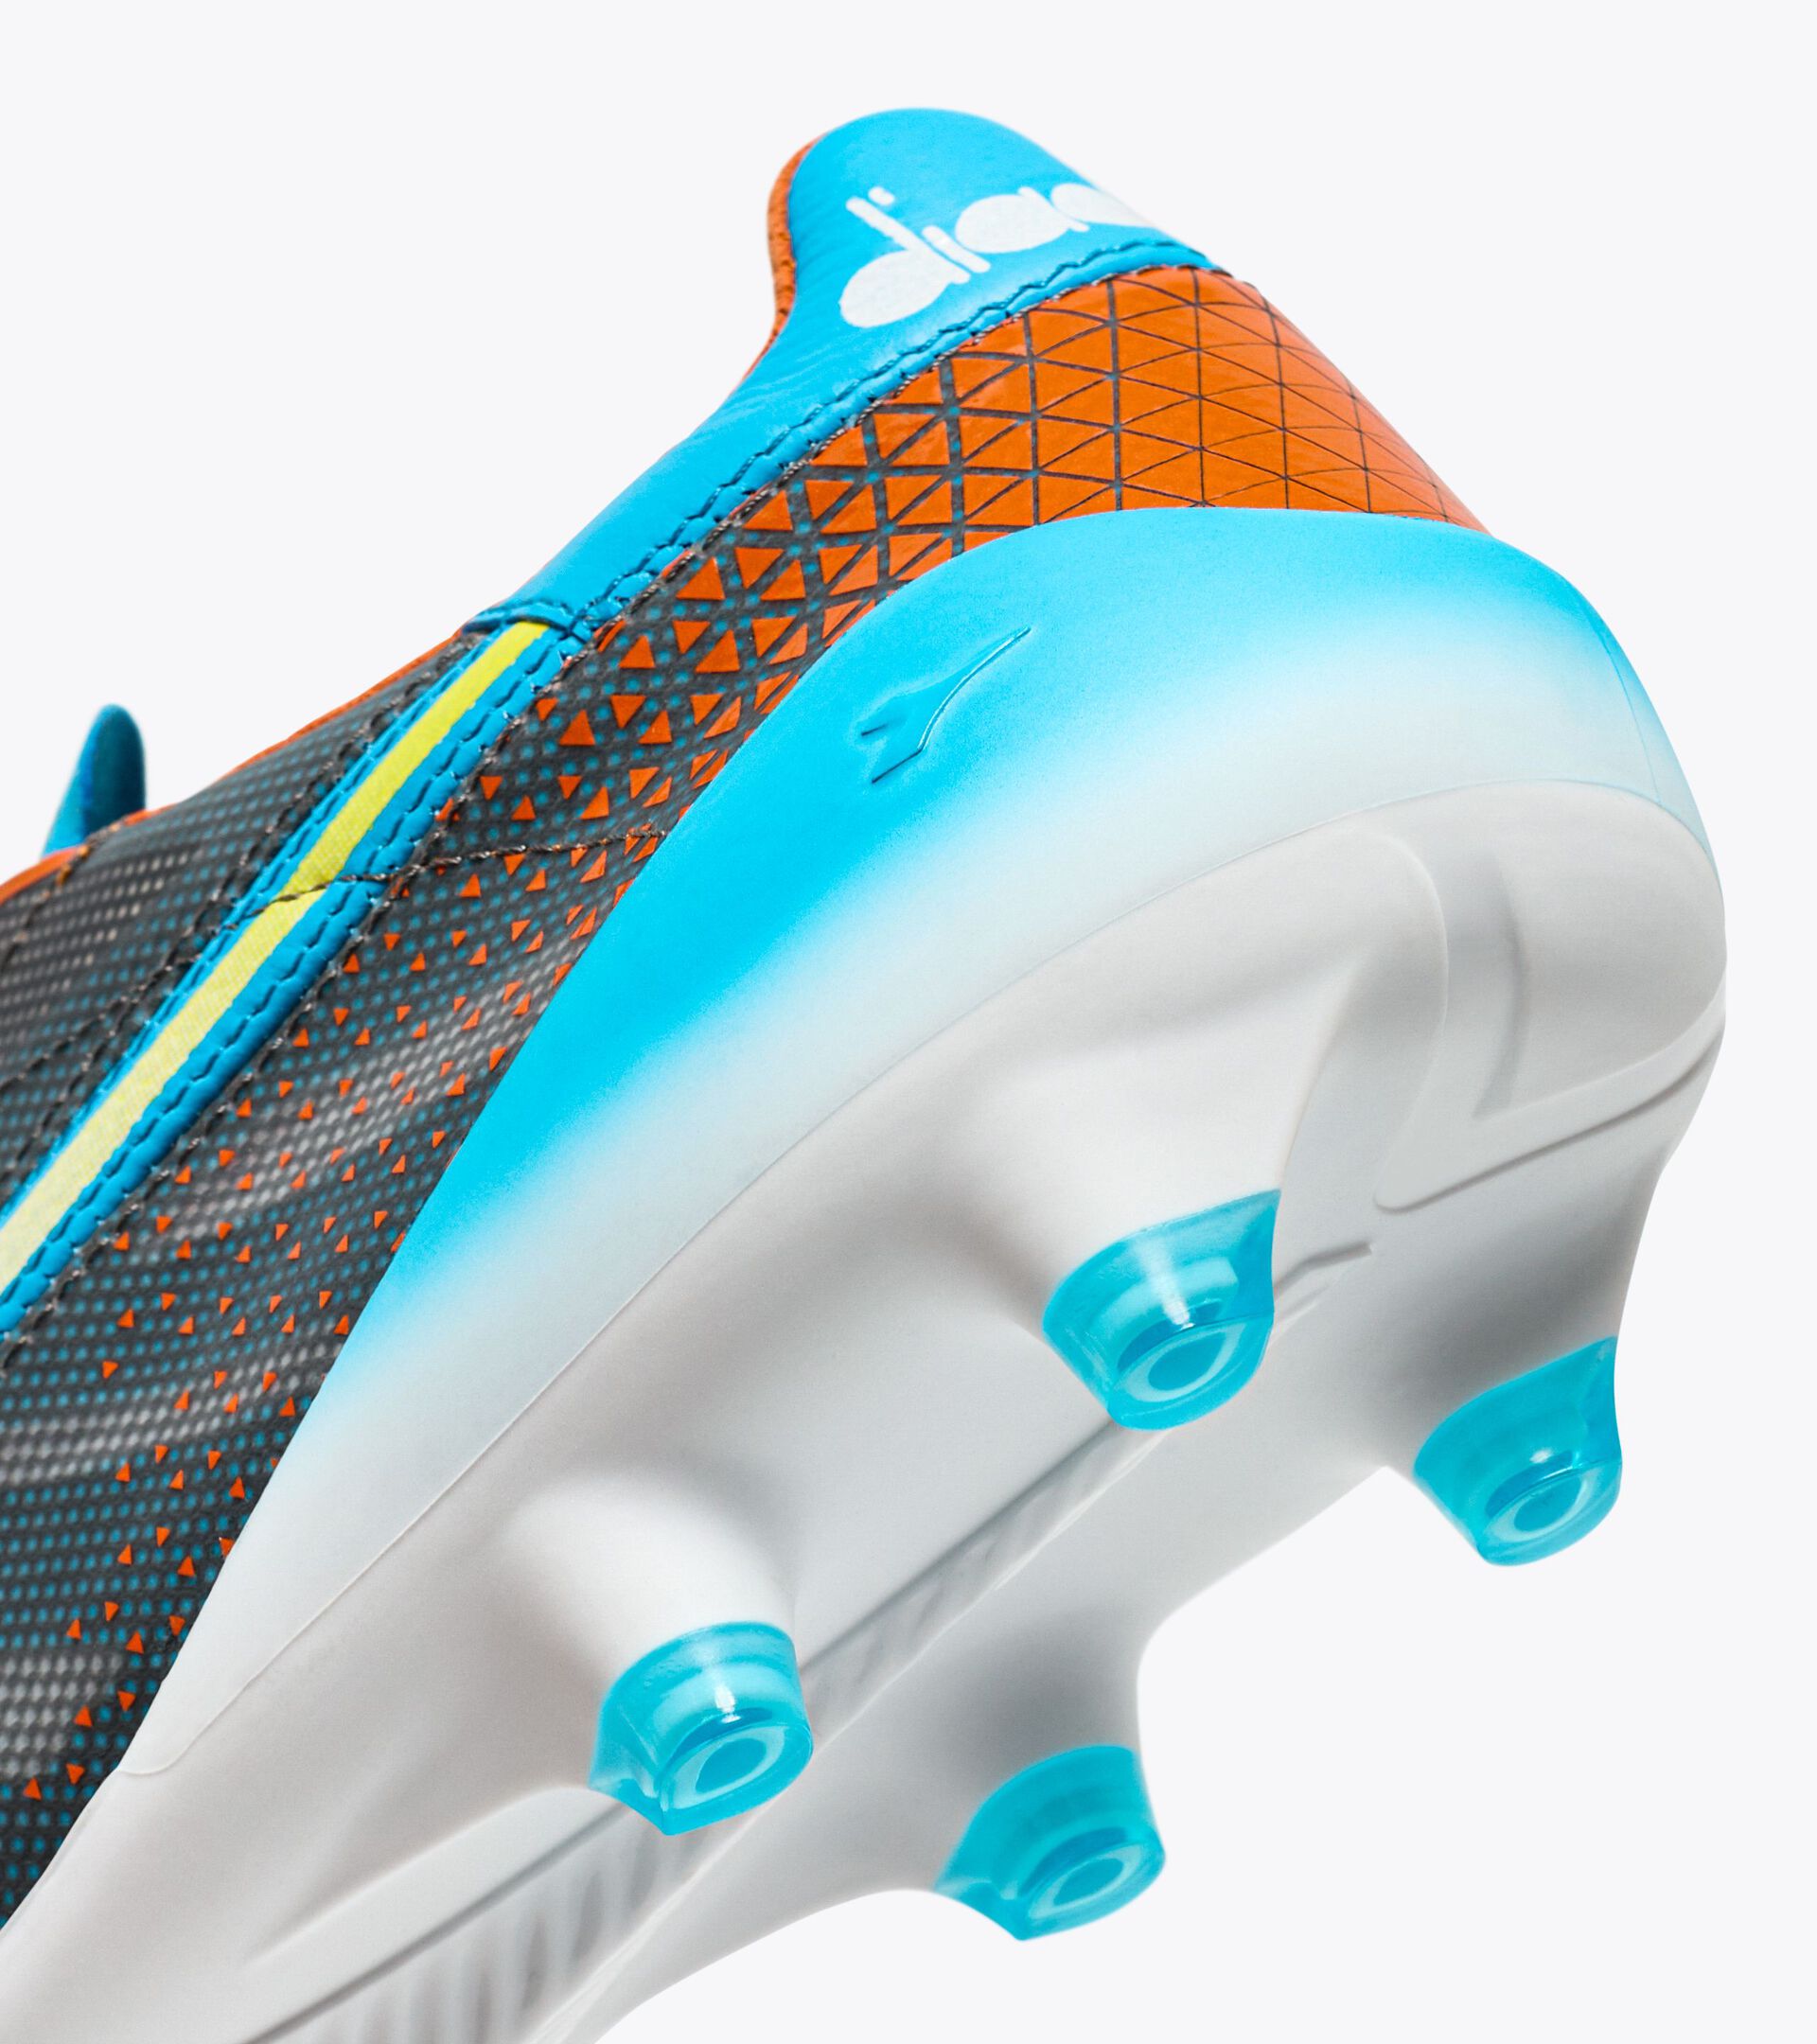 Calcio boots for firm grounds - Made in Italy - Gender Neutral BRASIL ELITE VELOCE GR ITA LPX BLUE FLUO/WHITE/ORANGE - Diadora